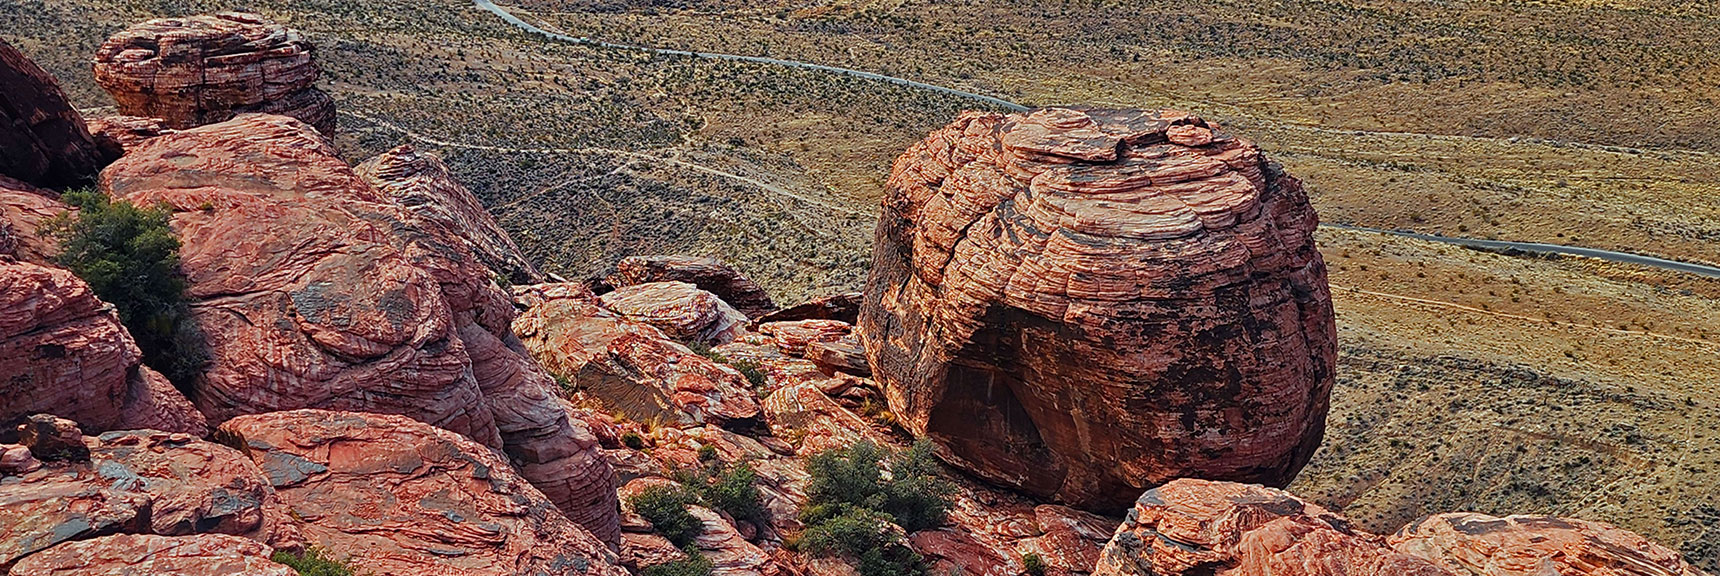 Another Artistically Sculpted Sandstone Boulder | Grand Staircase | Calico Basin, Nevada